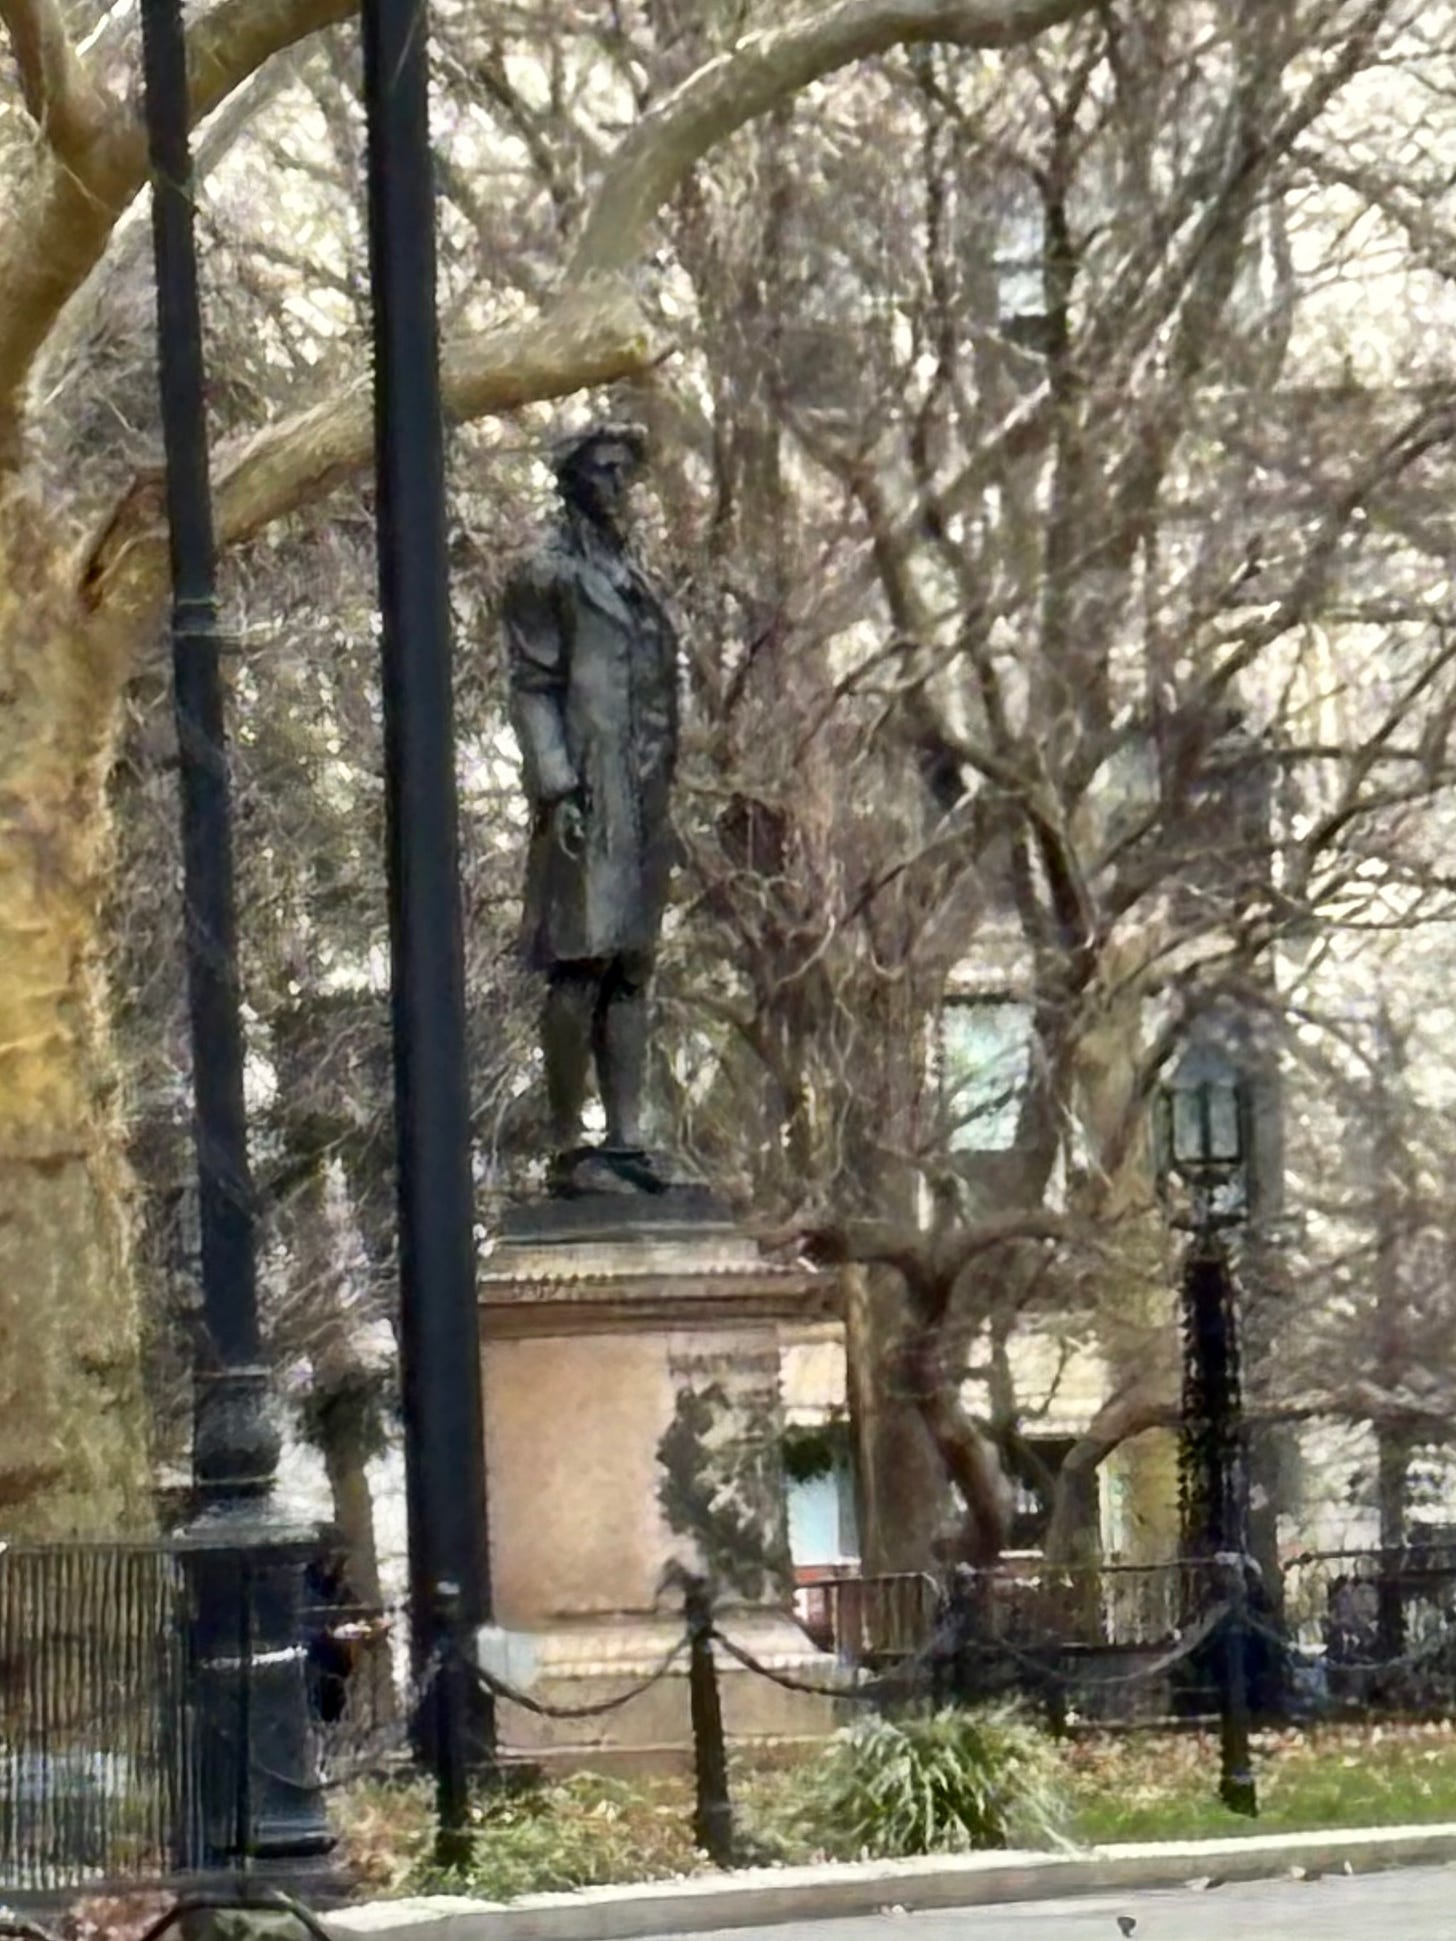 A zoomed-in photo of the front of Hale's statue. A high fence is visible to his right, our left.